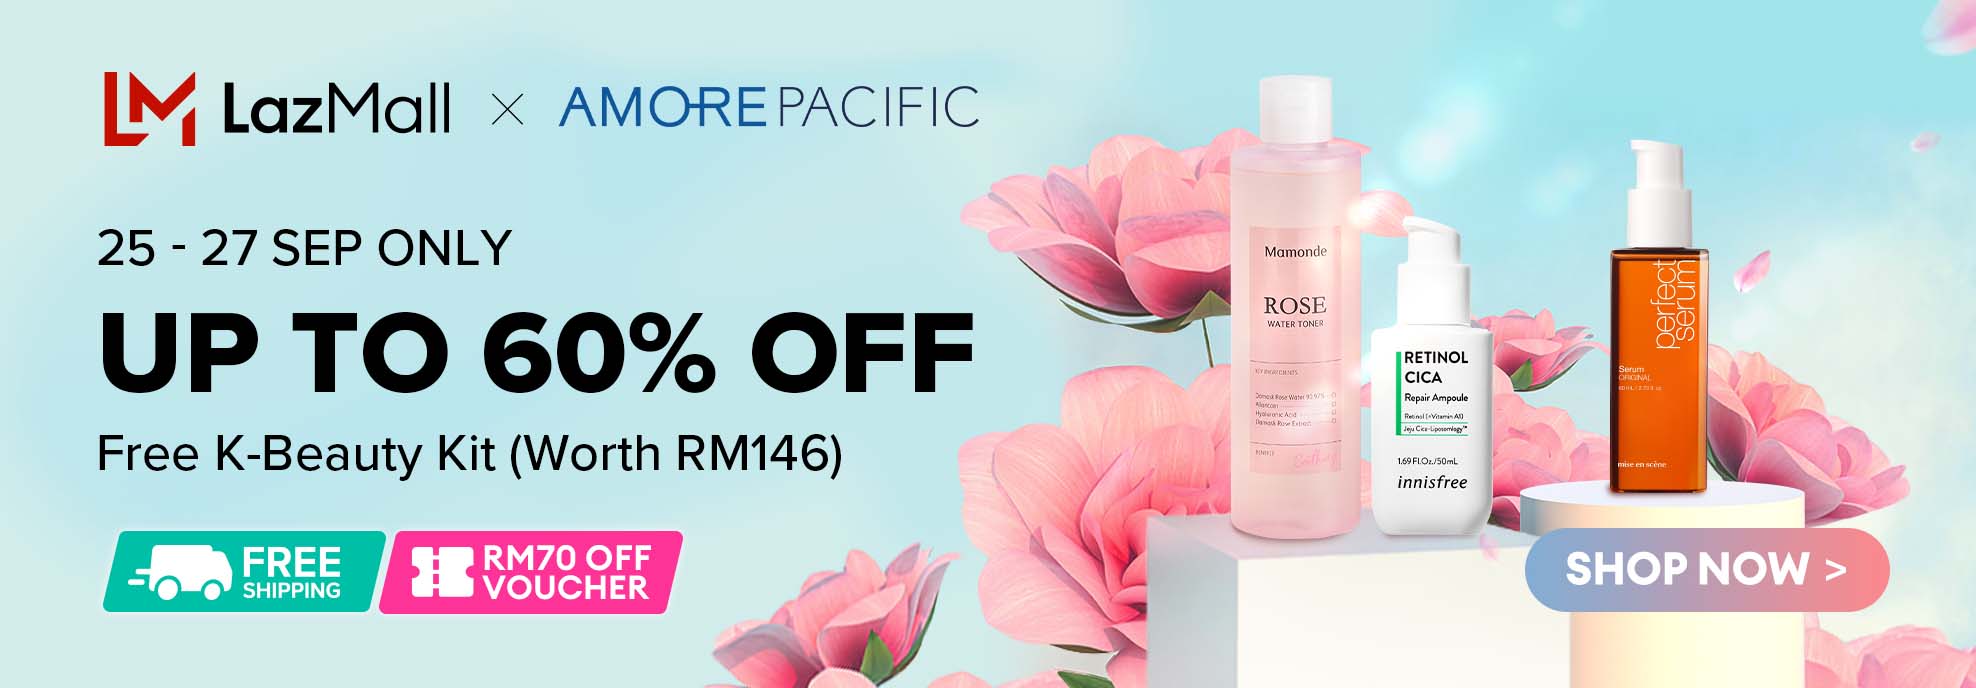 Amorepacific Group Campaign